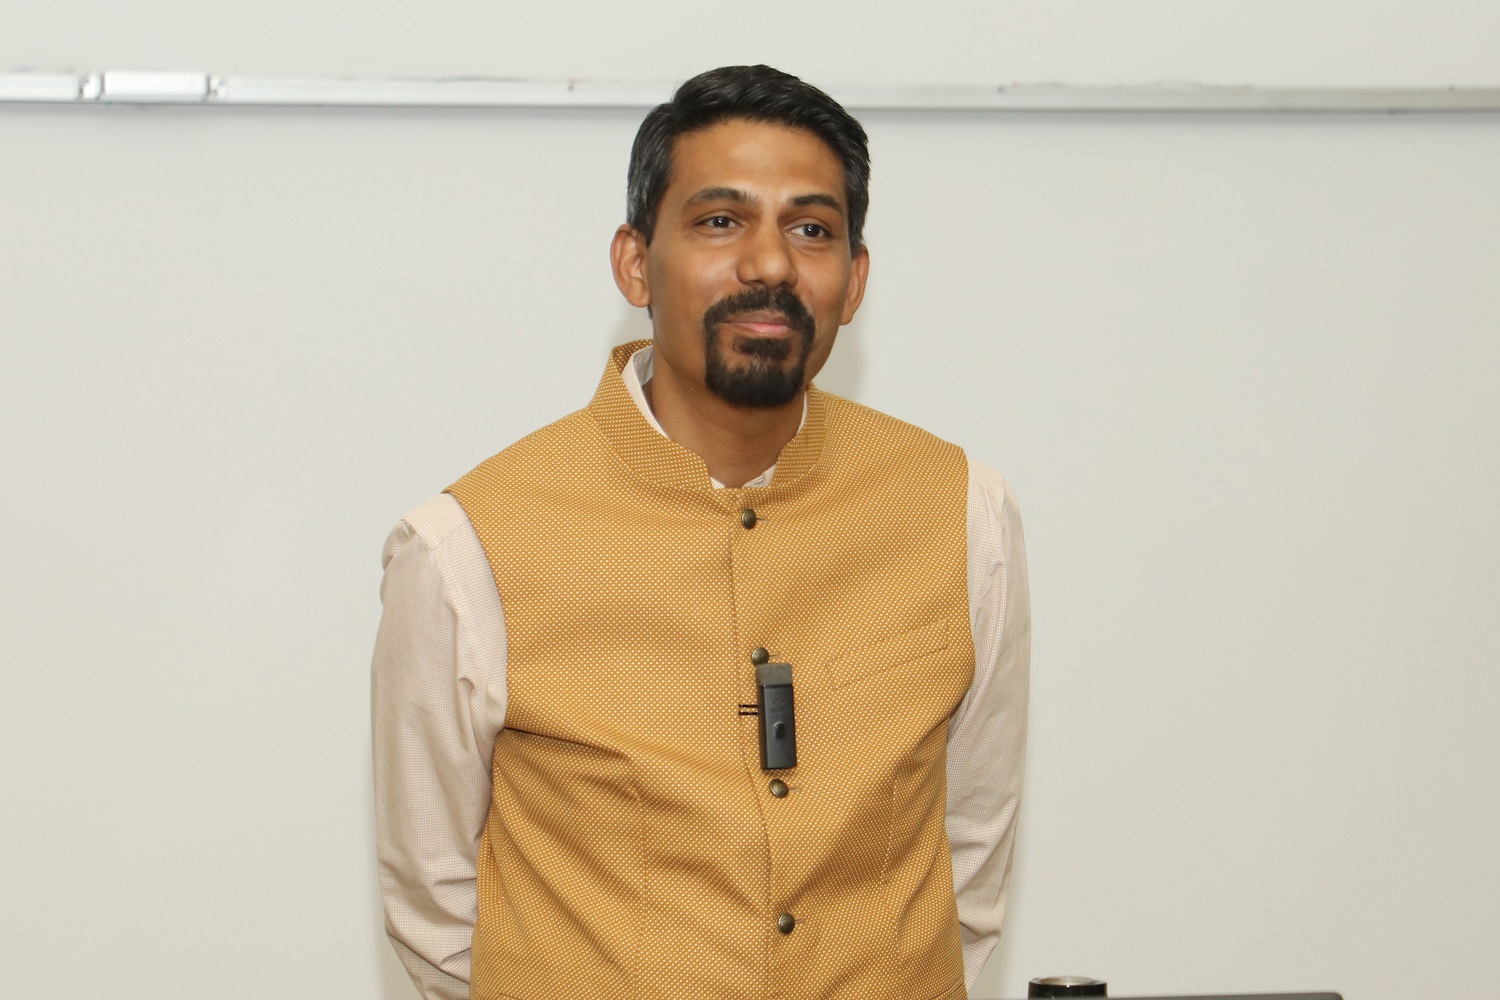 In his welcome address, Prof. Jitamitra Desai, Chairperson, Supply Chain Management Centre at IIMB, spoke of the work that went into setting up the lab. “We worked hard for two years. We were focused on sustainability and digitalization in this space.”